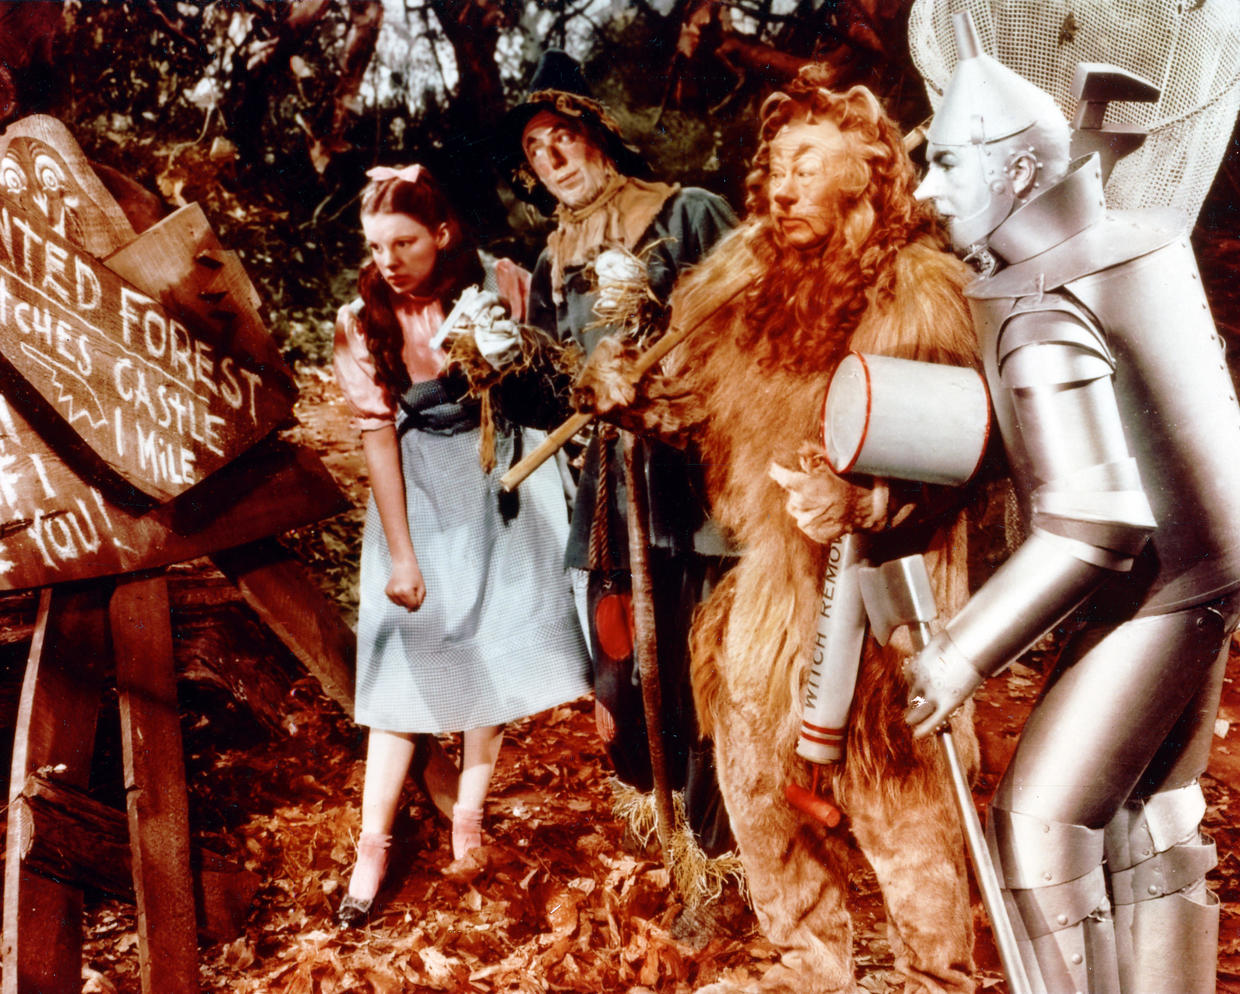 “The Wizard of Oz” celebrating its 85th anniversary with limited